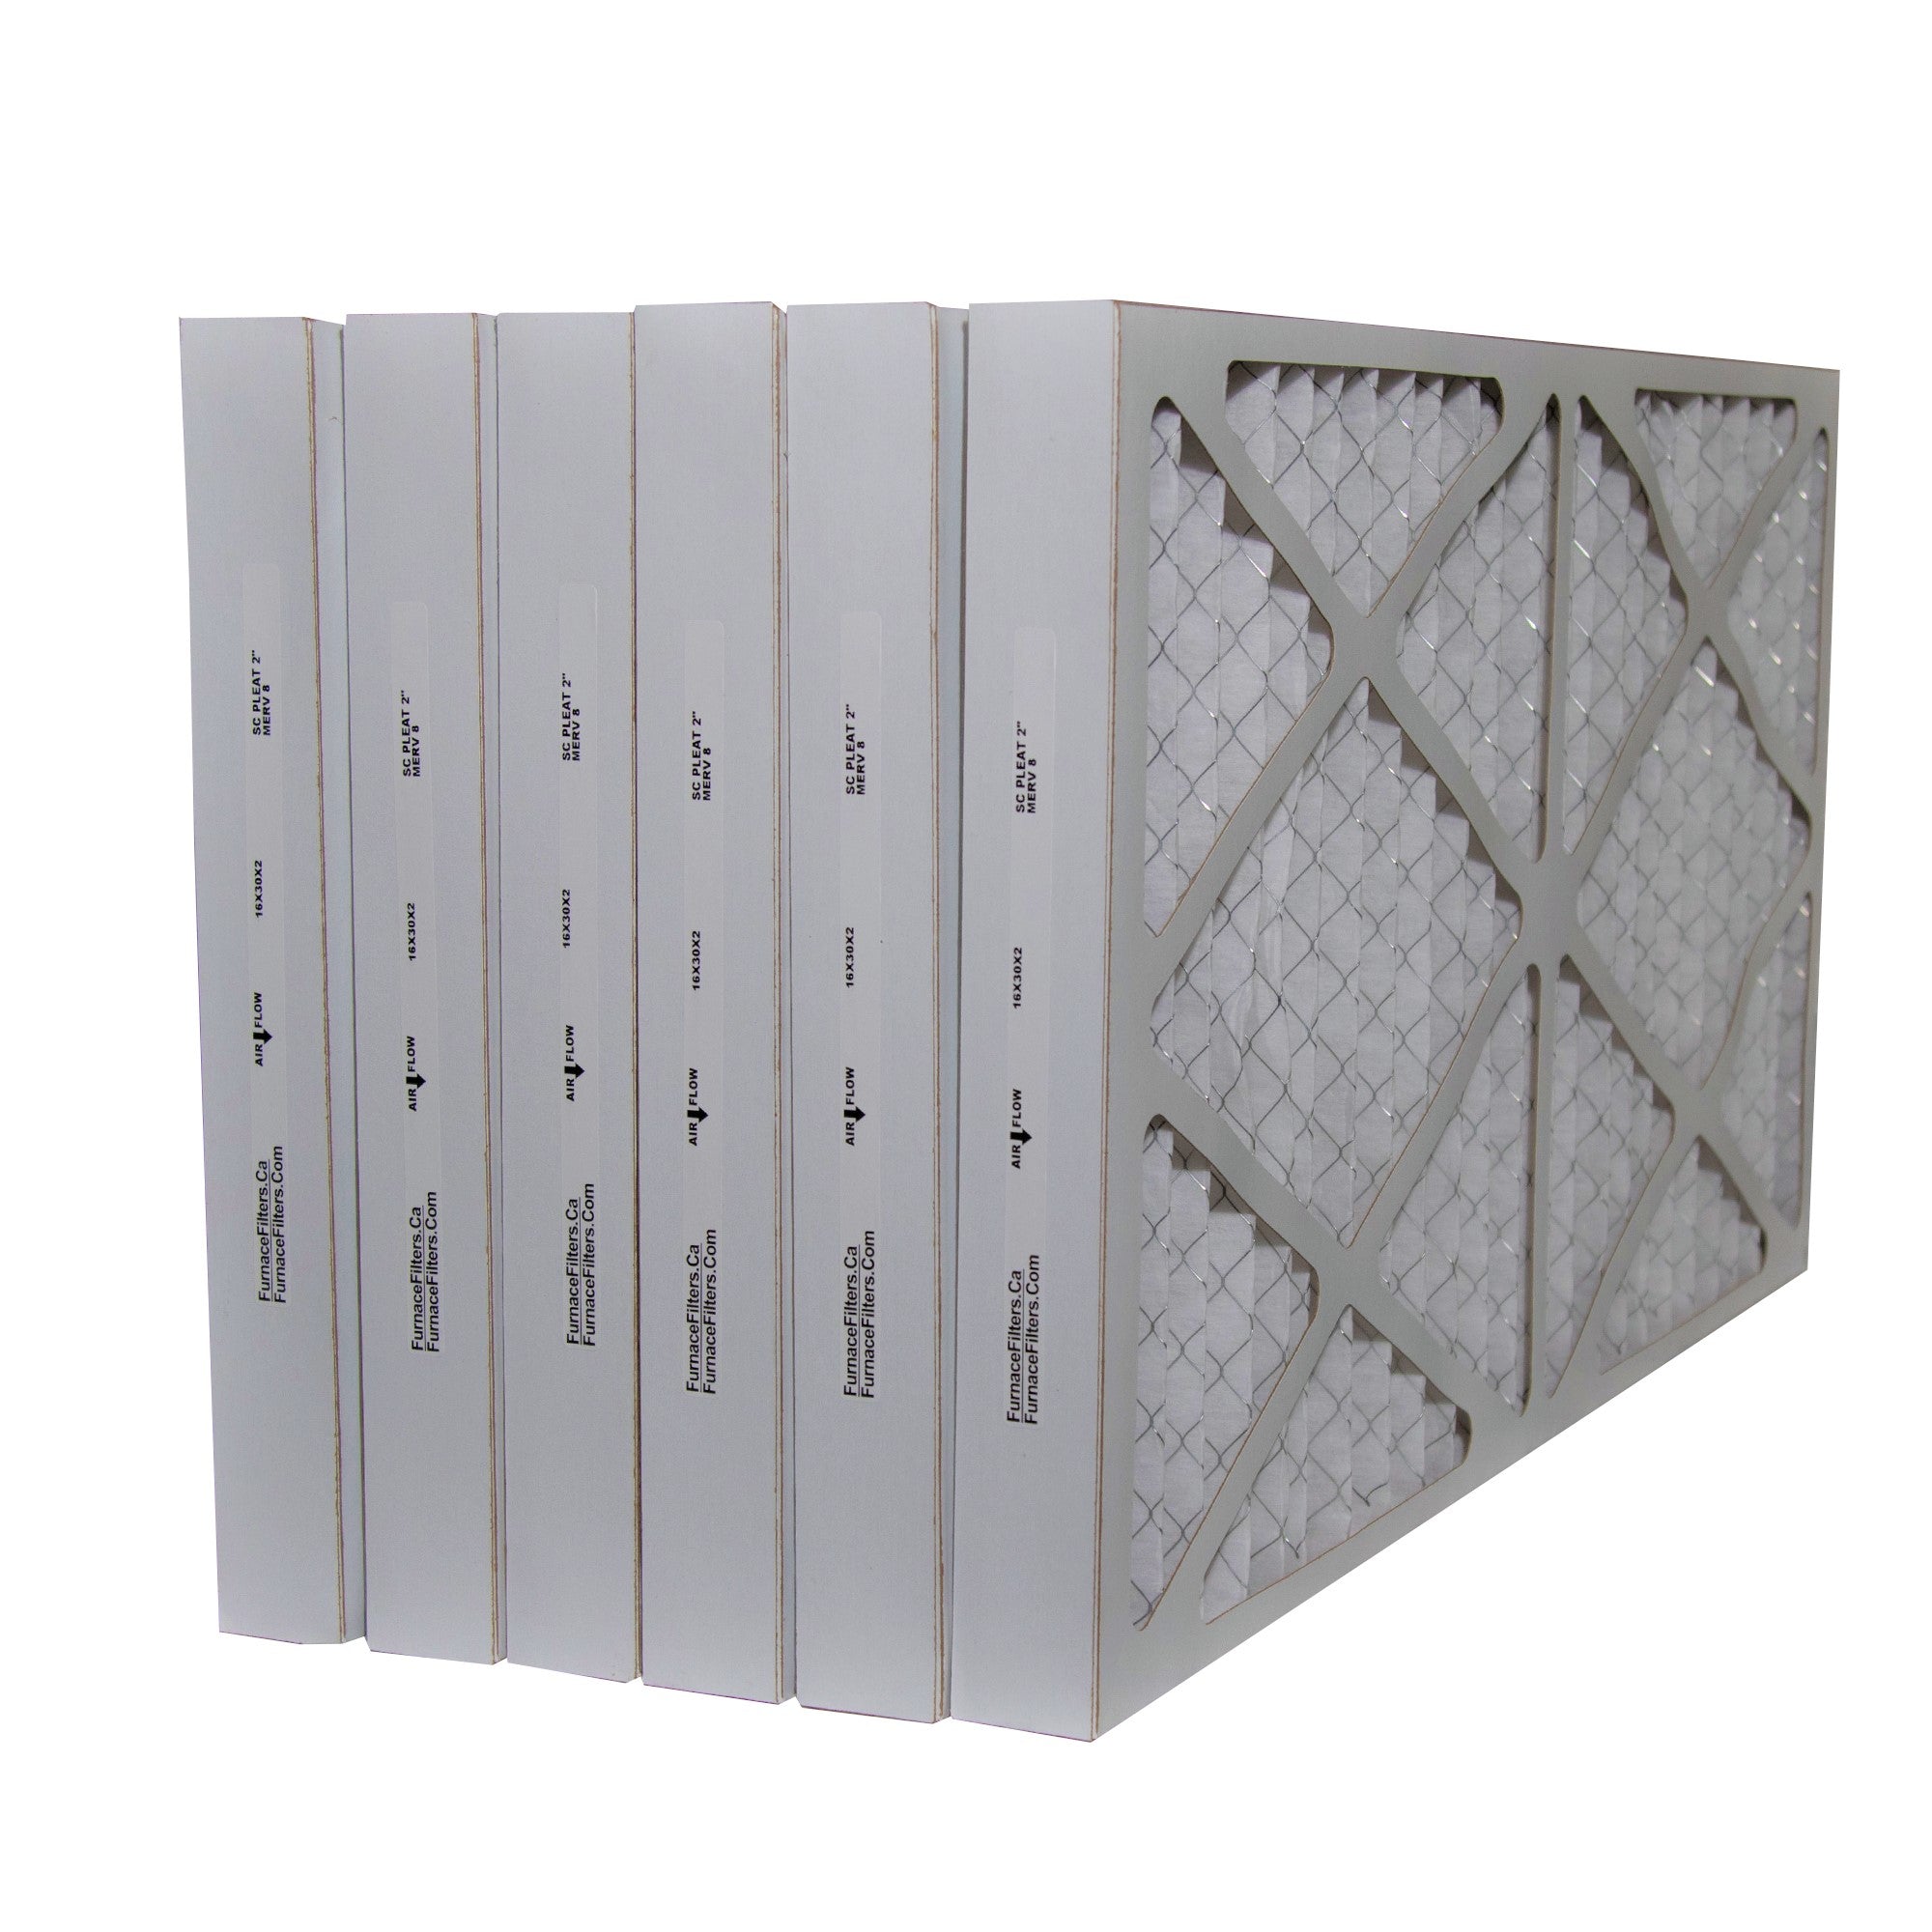 16x30x2 Furnace Filter MERV 8 Custom Sized Pleated Filters. Case of 6